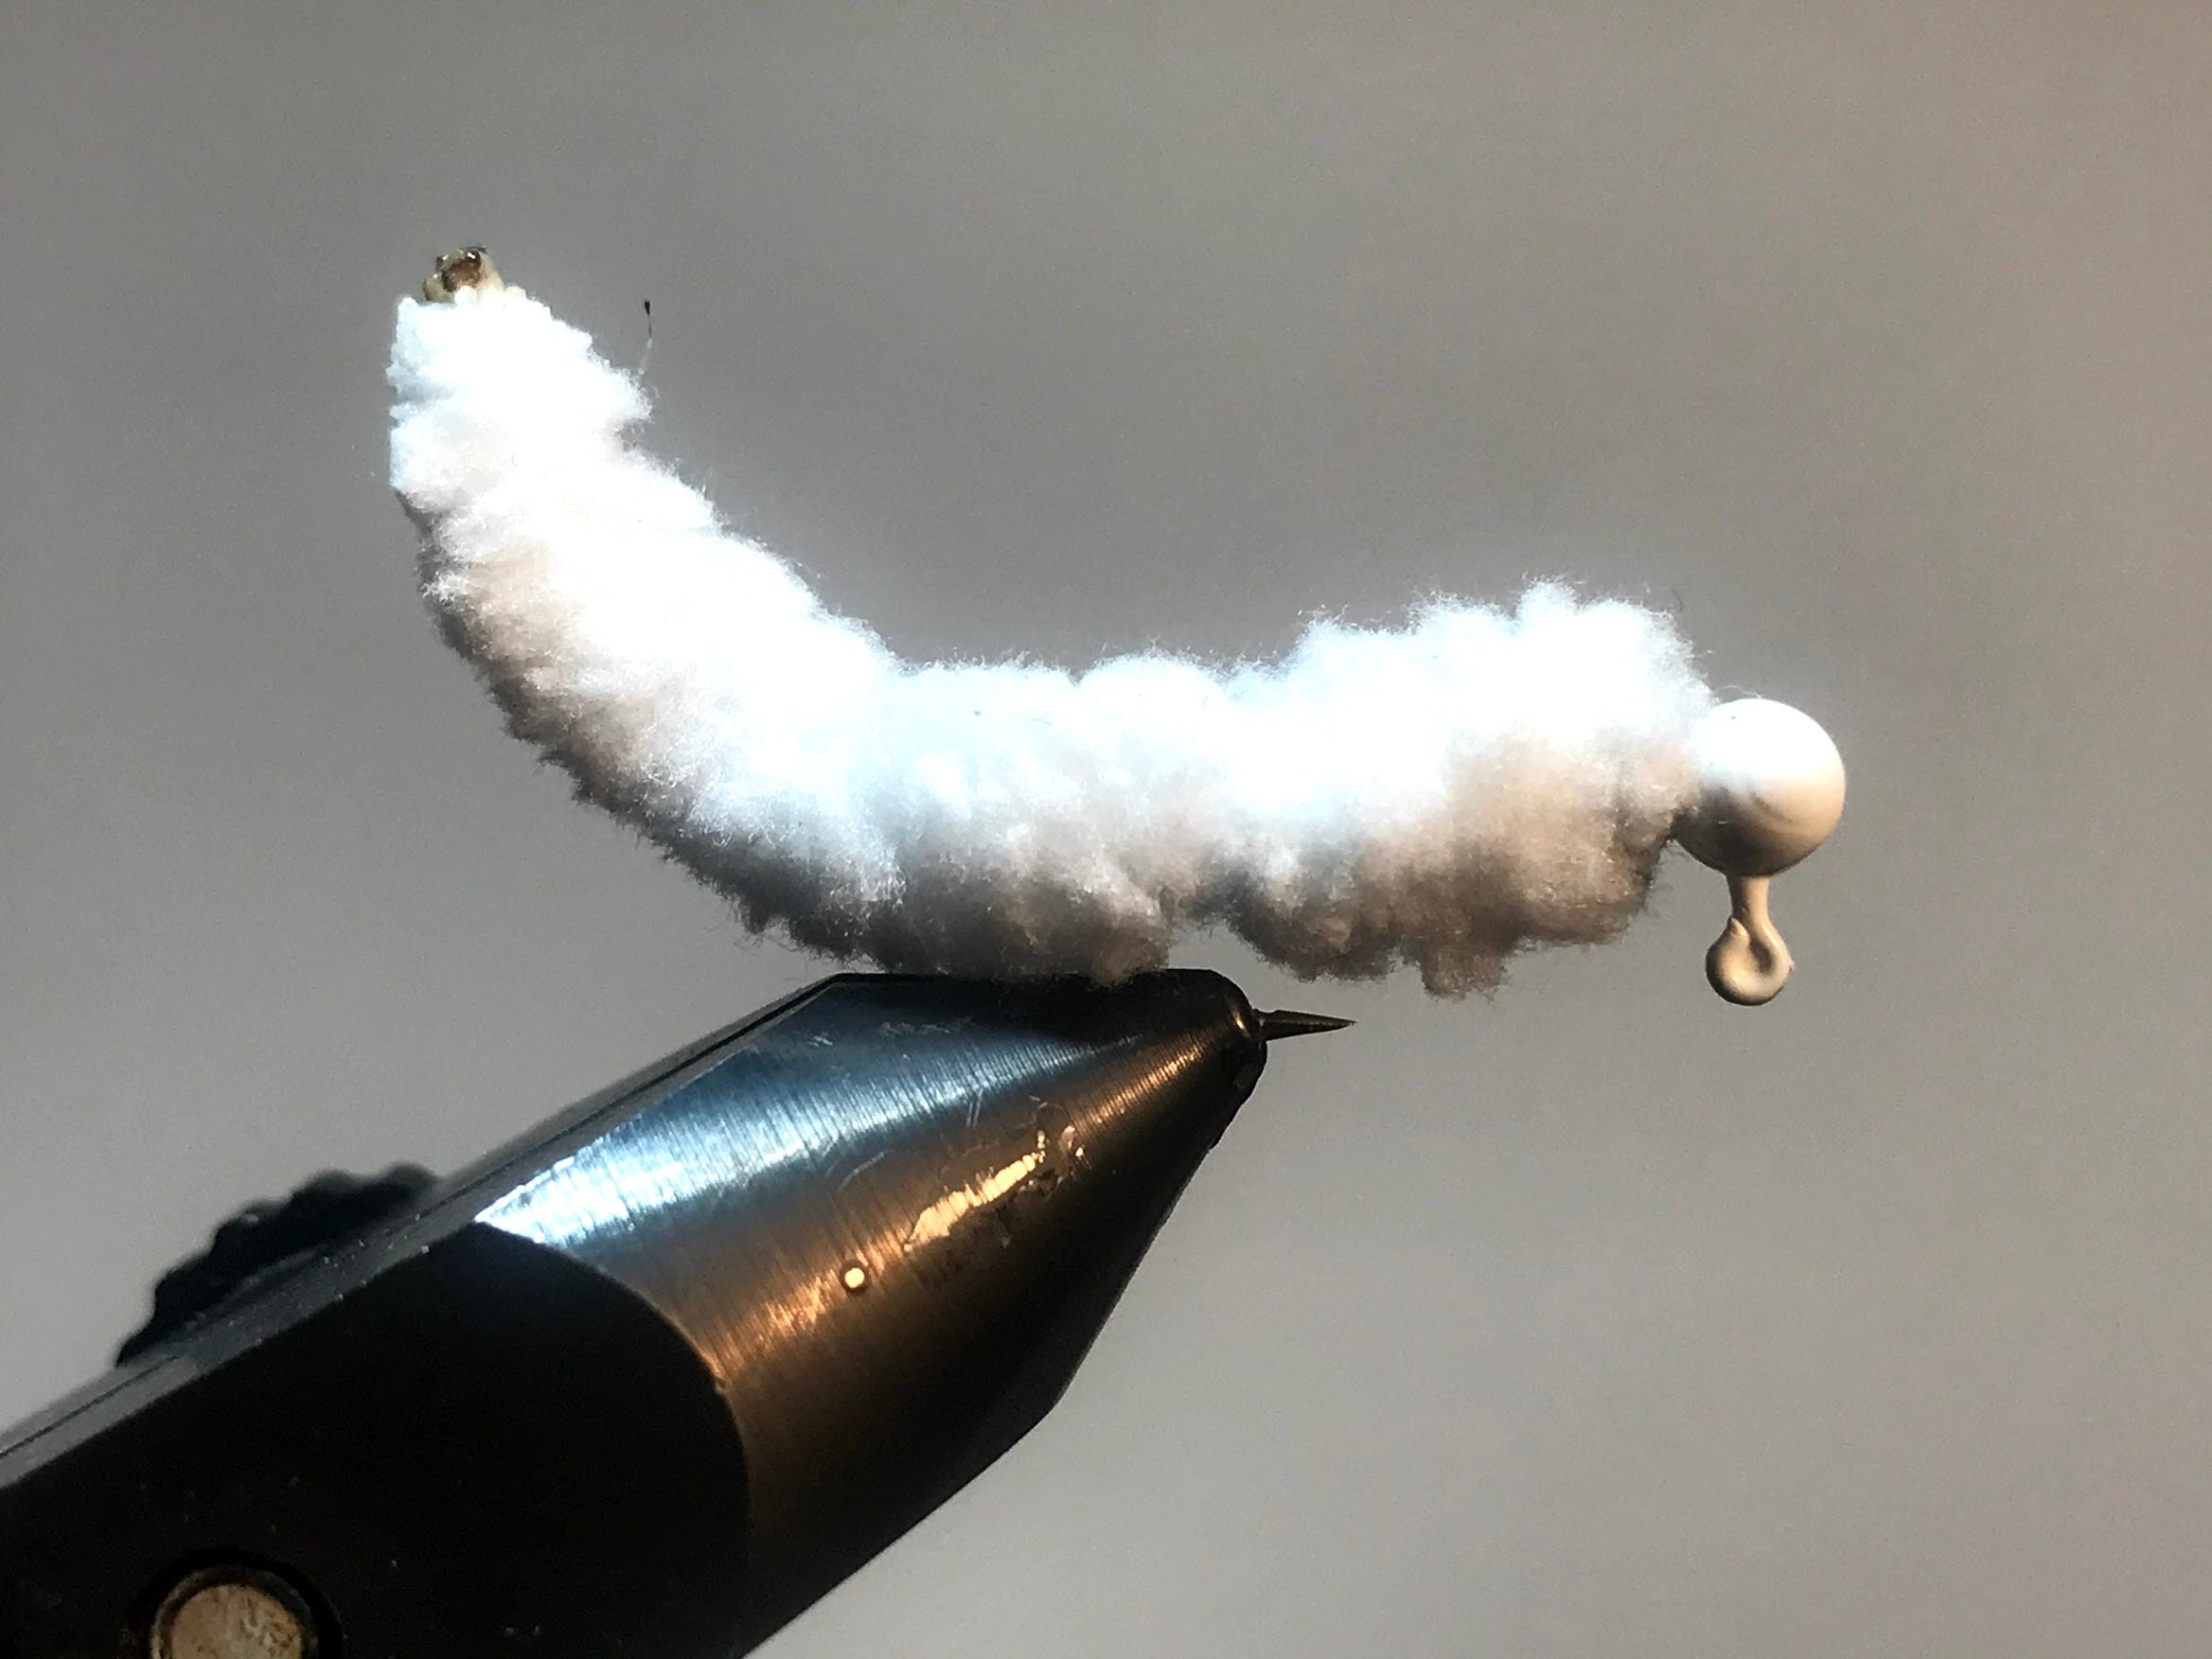 Mini Tube Jigs: Mexican Sunrise – Peter's Custom Trout Worms